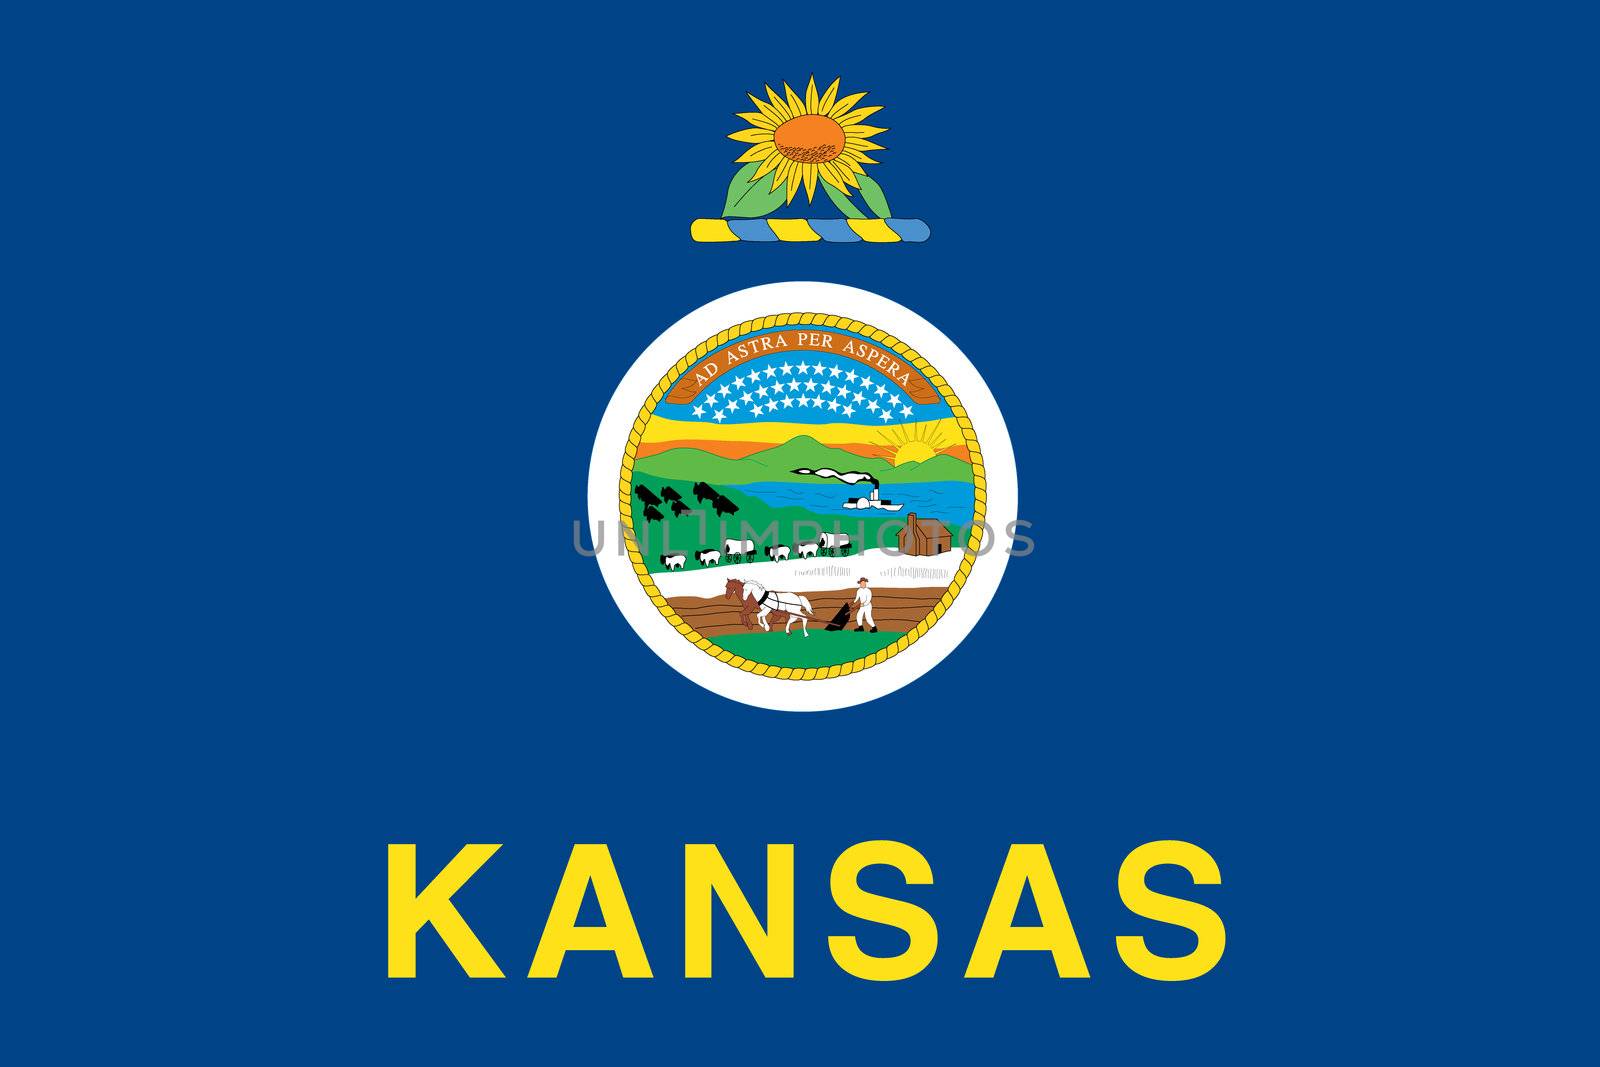 The Flag of the American State of Kansas